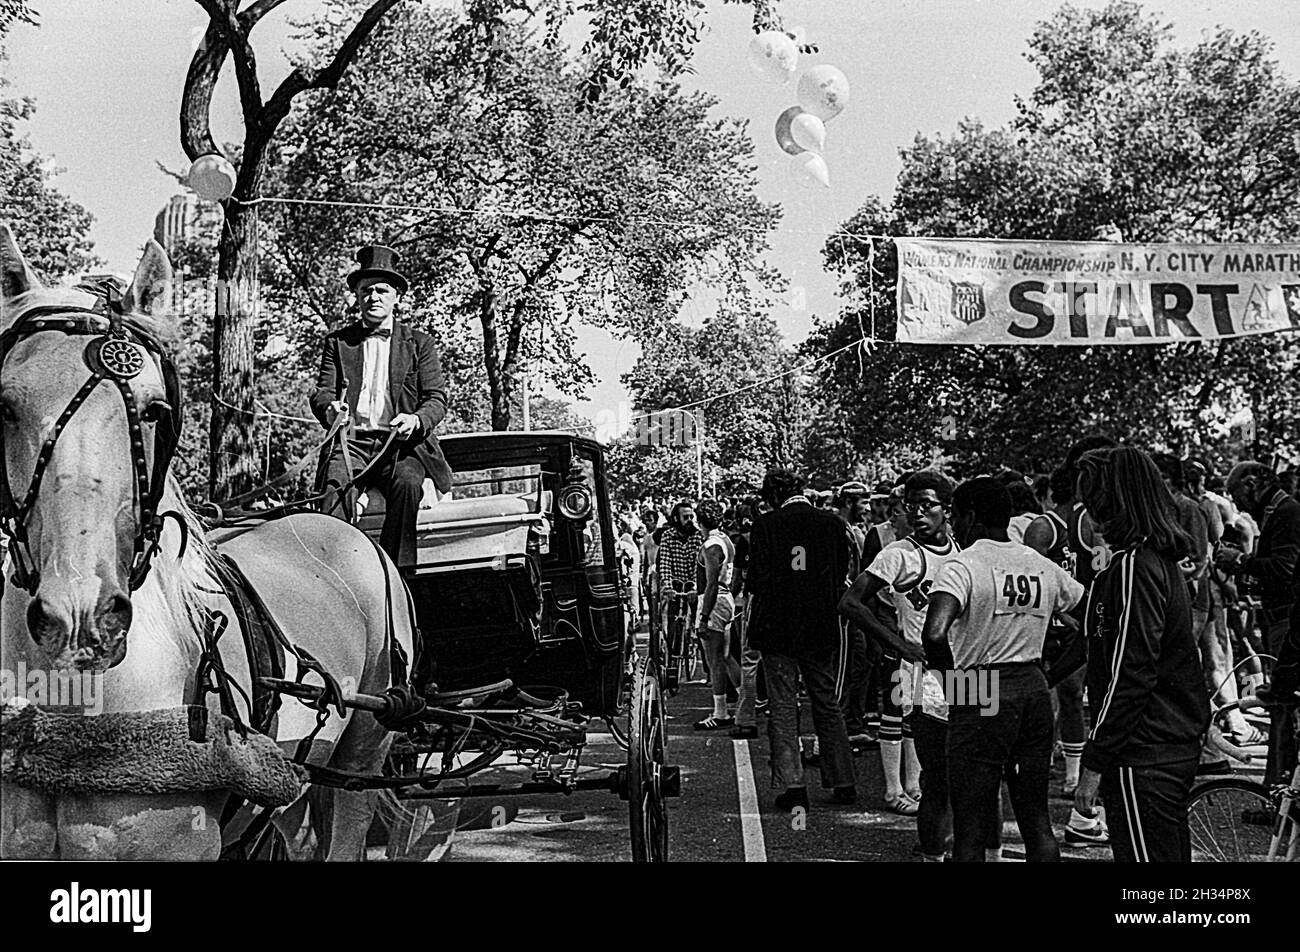 Horse-drawn carriage and runners competing in  the 1975 New York City Marathon. Stock Photo